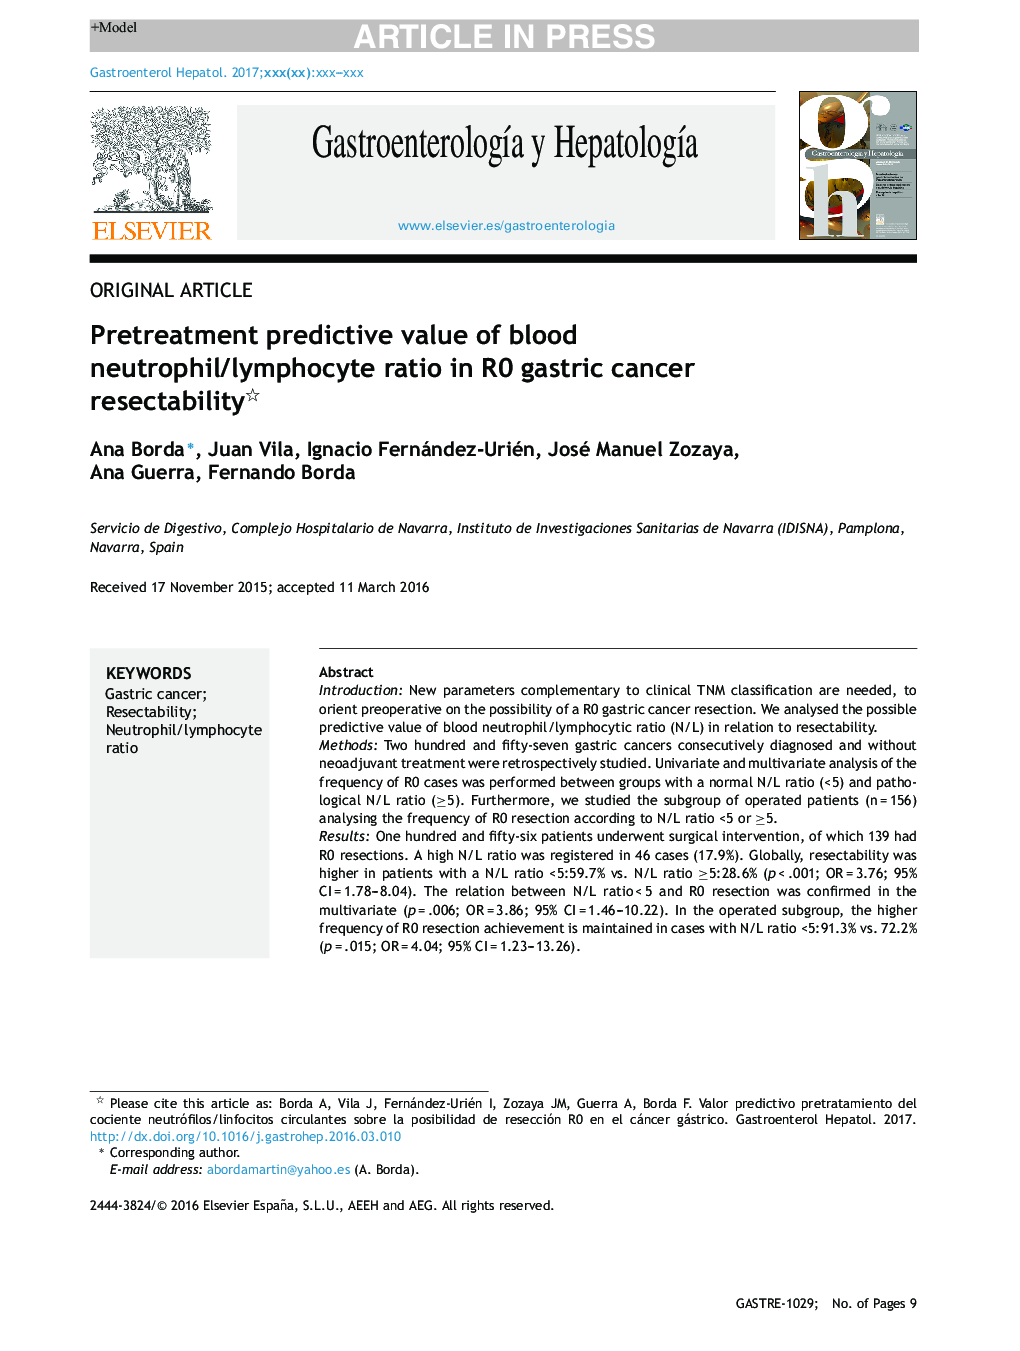 Pretreatment predictive value of blood neutrophil/lymphocyte ratio in R0 gastric cancer resectability